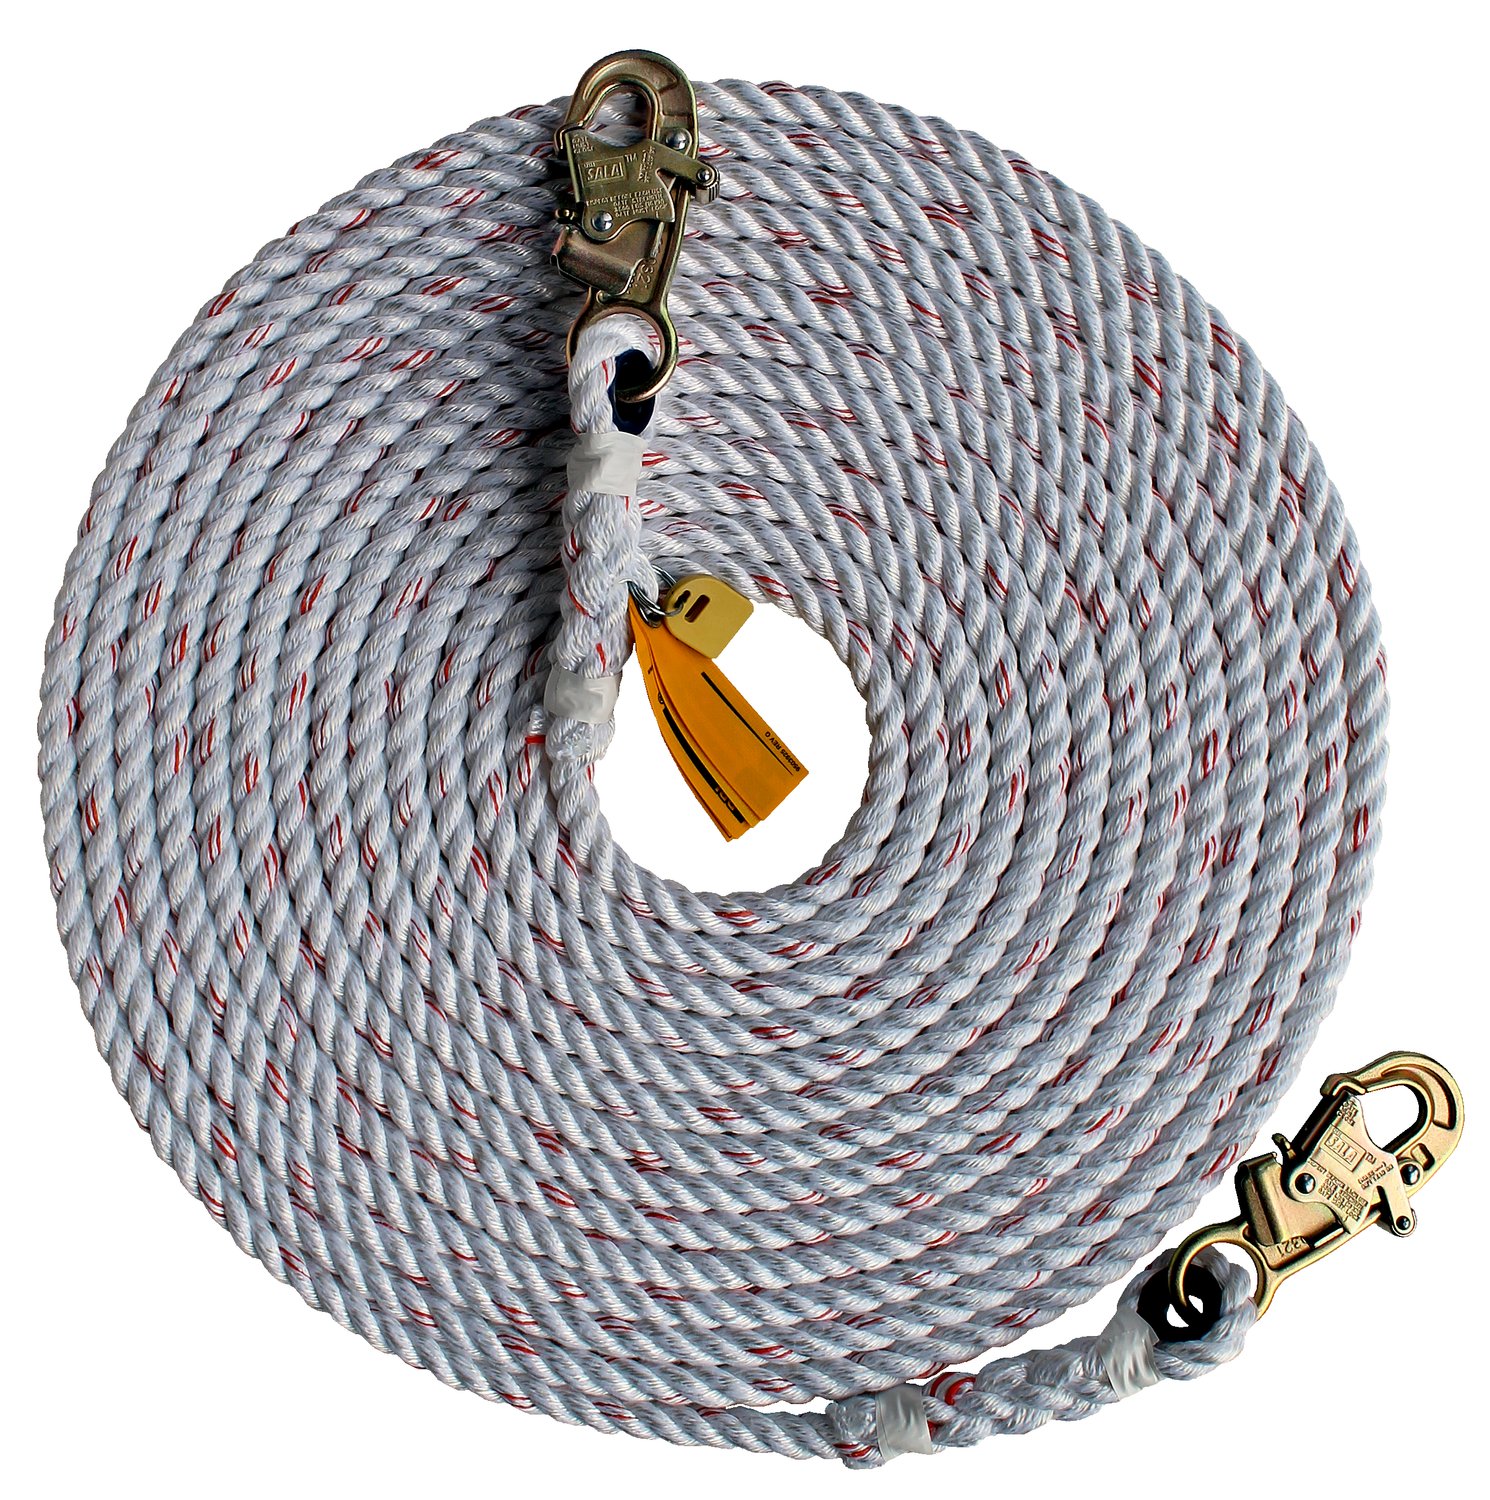 7012270796 - 3M DBI-SALA Rope Lifeline with Snap Hook Both Ends 1202899, 5/8 in Polyester and Polypropylene Blend, White, 200 ft